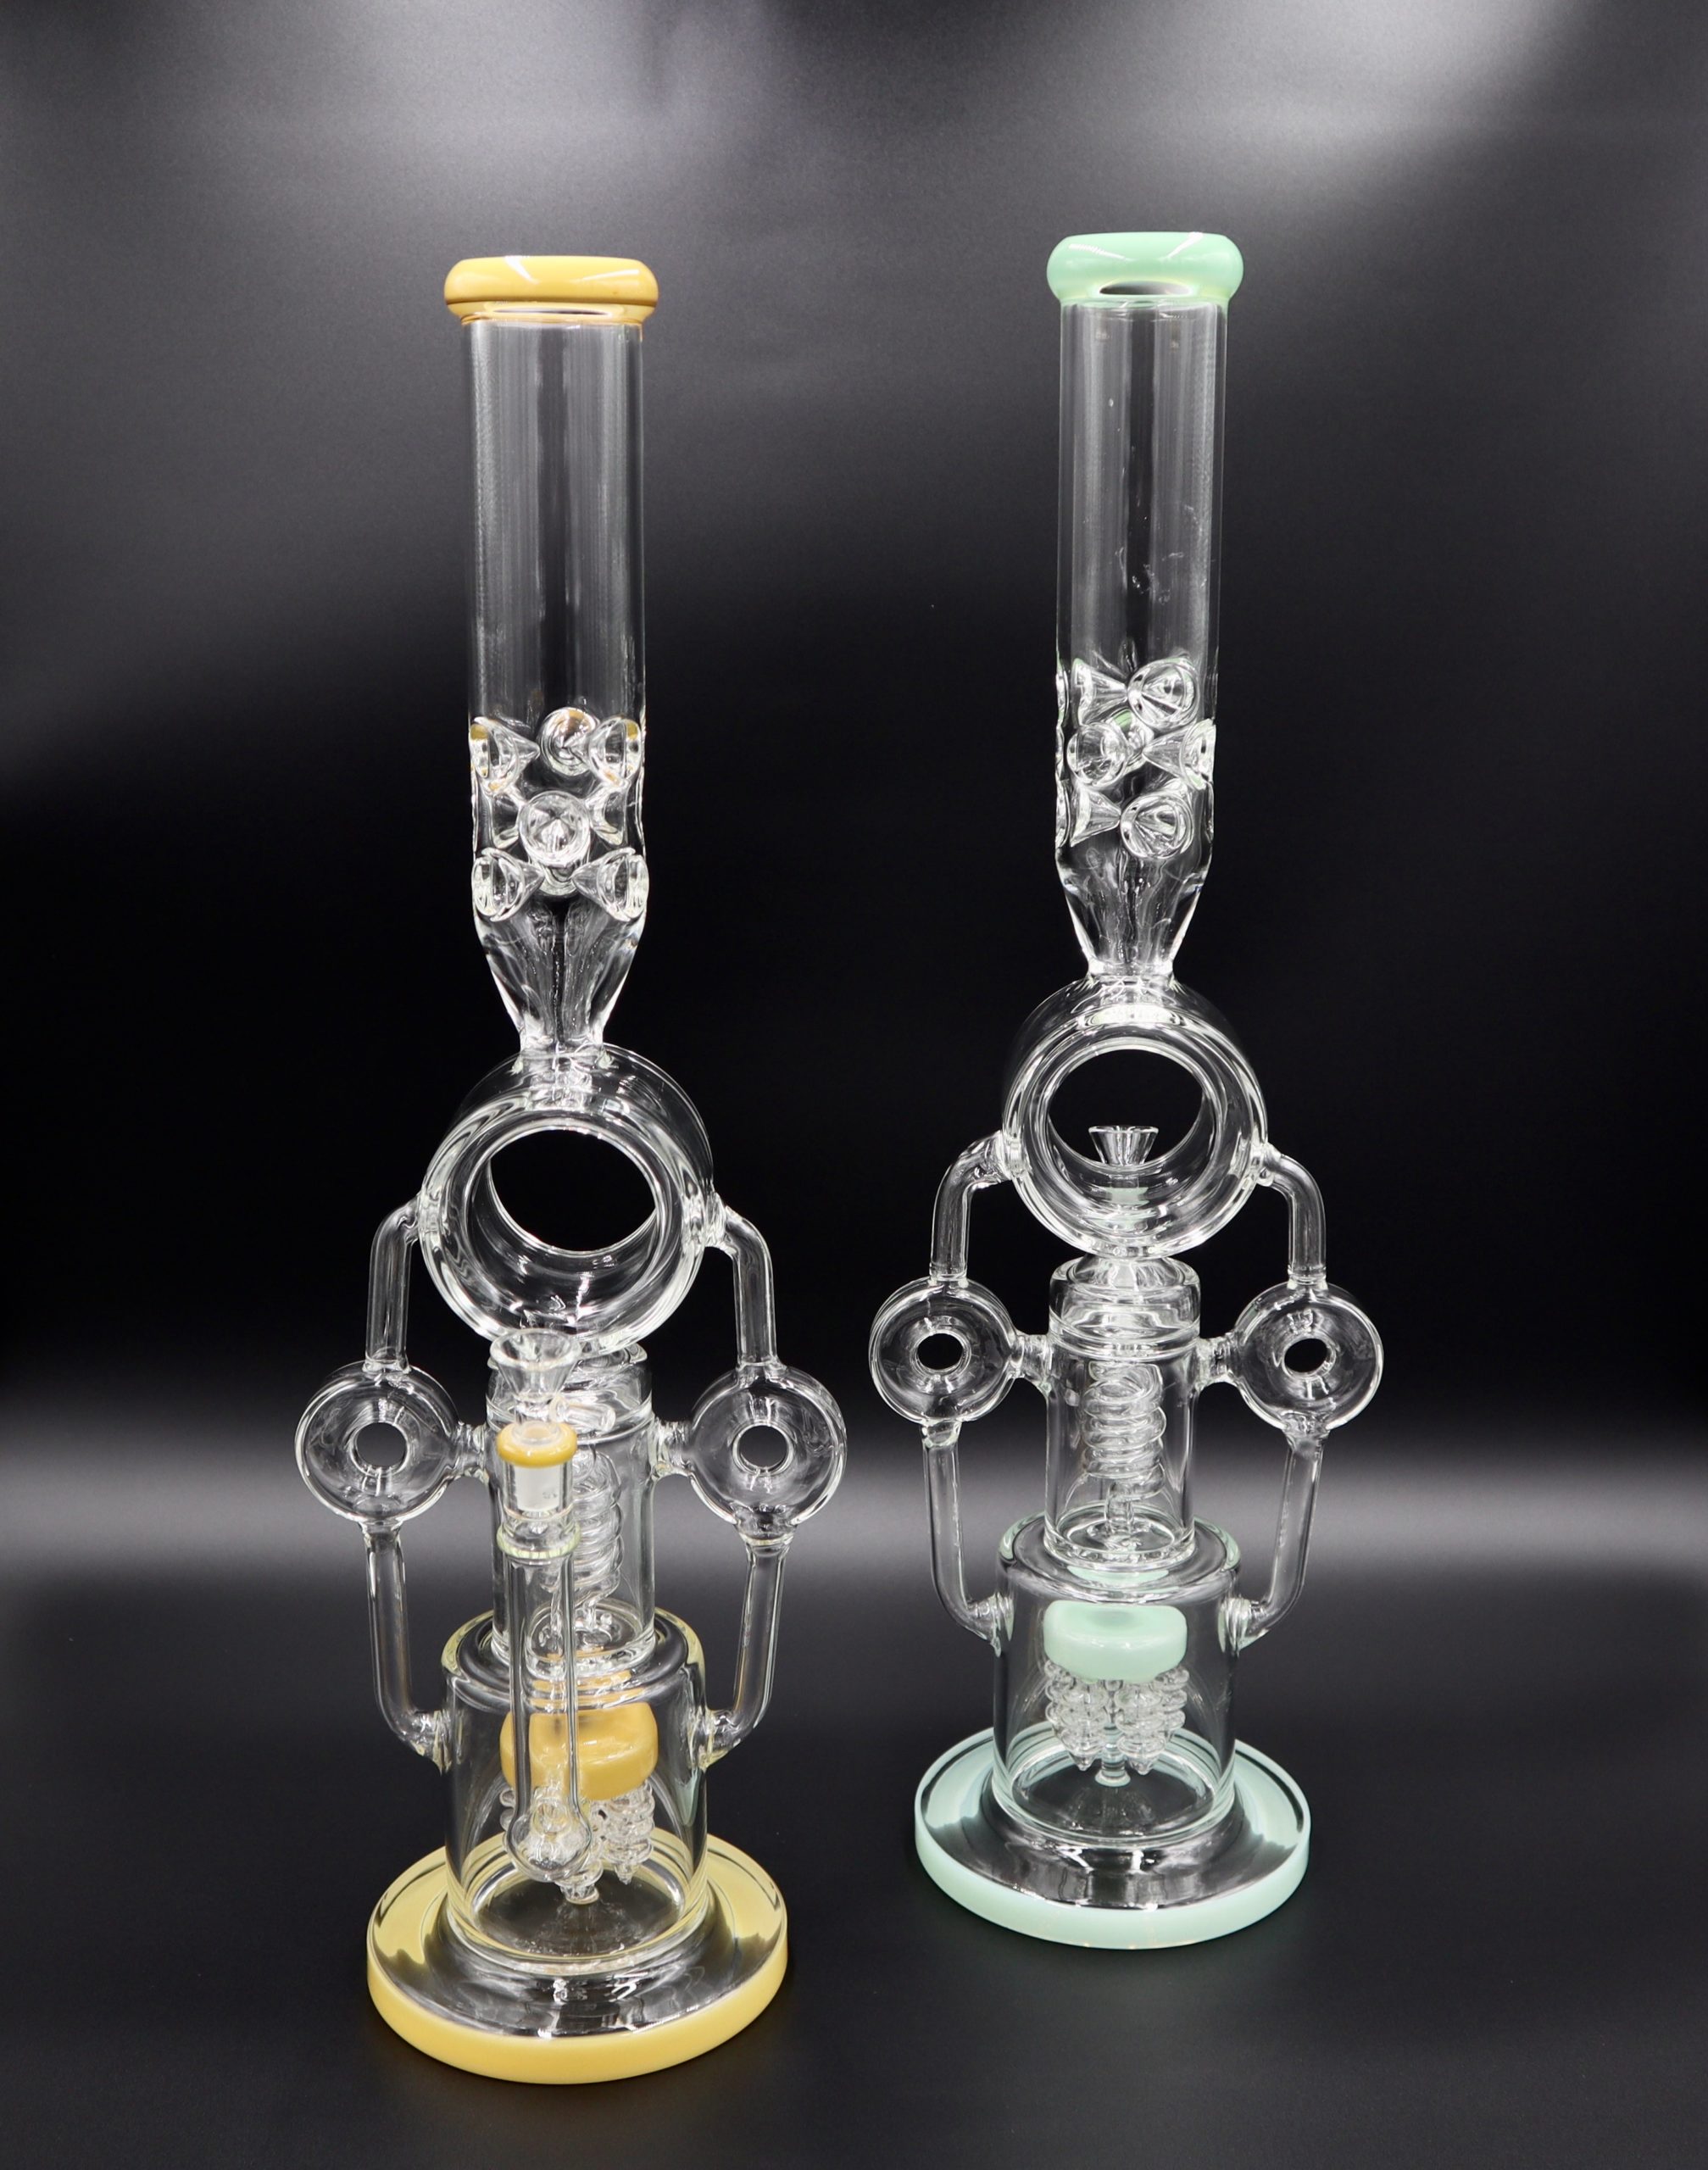 https://topfivewholesale.com/wp-content/uploads/2022/10/GL089-20%E2%80%B3-Water-Pipe-Swiss-Neck-Twisted-Percolator-Double-Barrel-3-Ring-Assorted.jpg